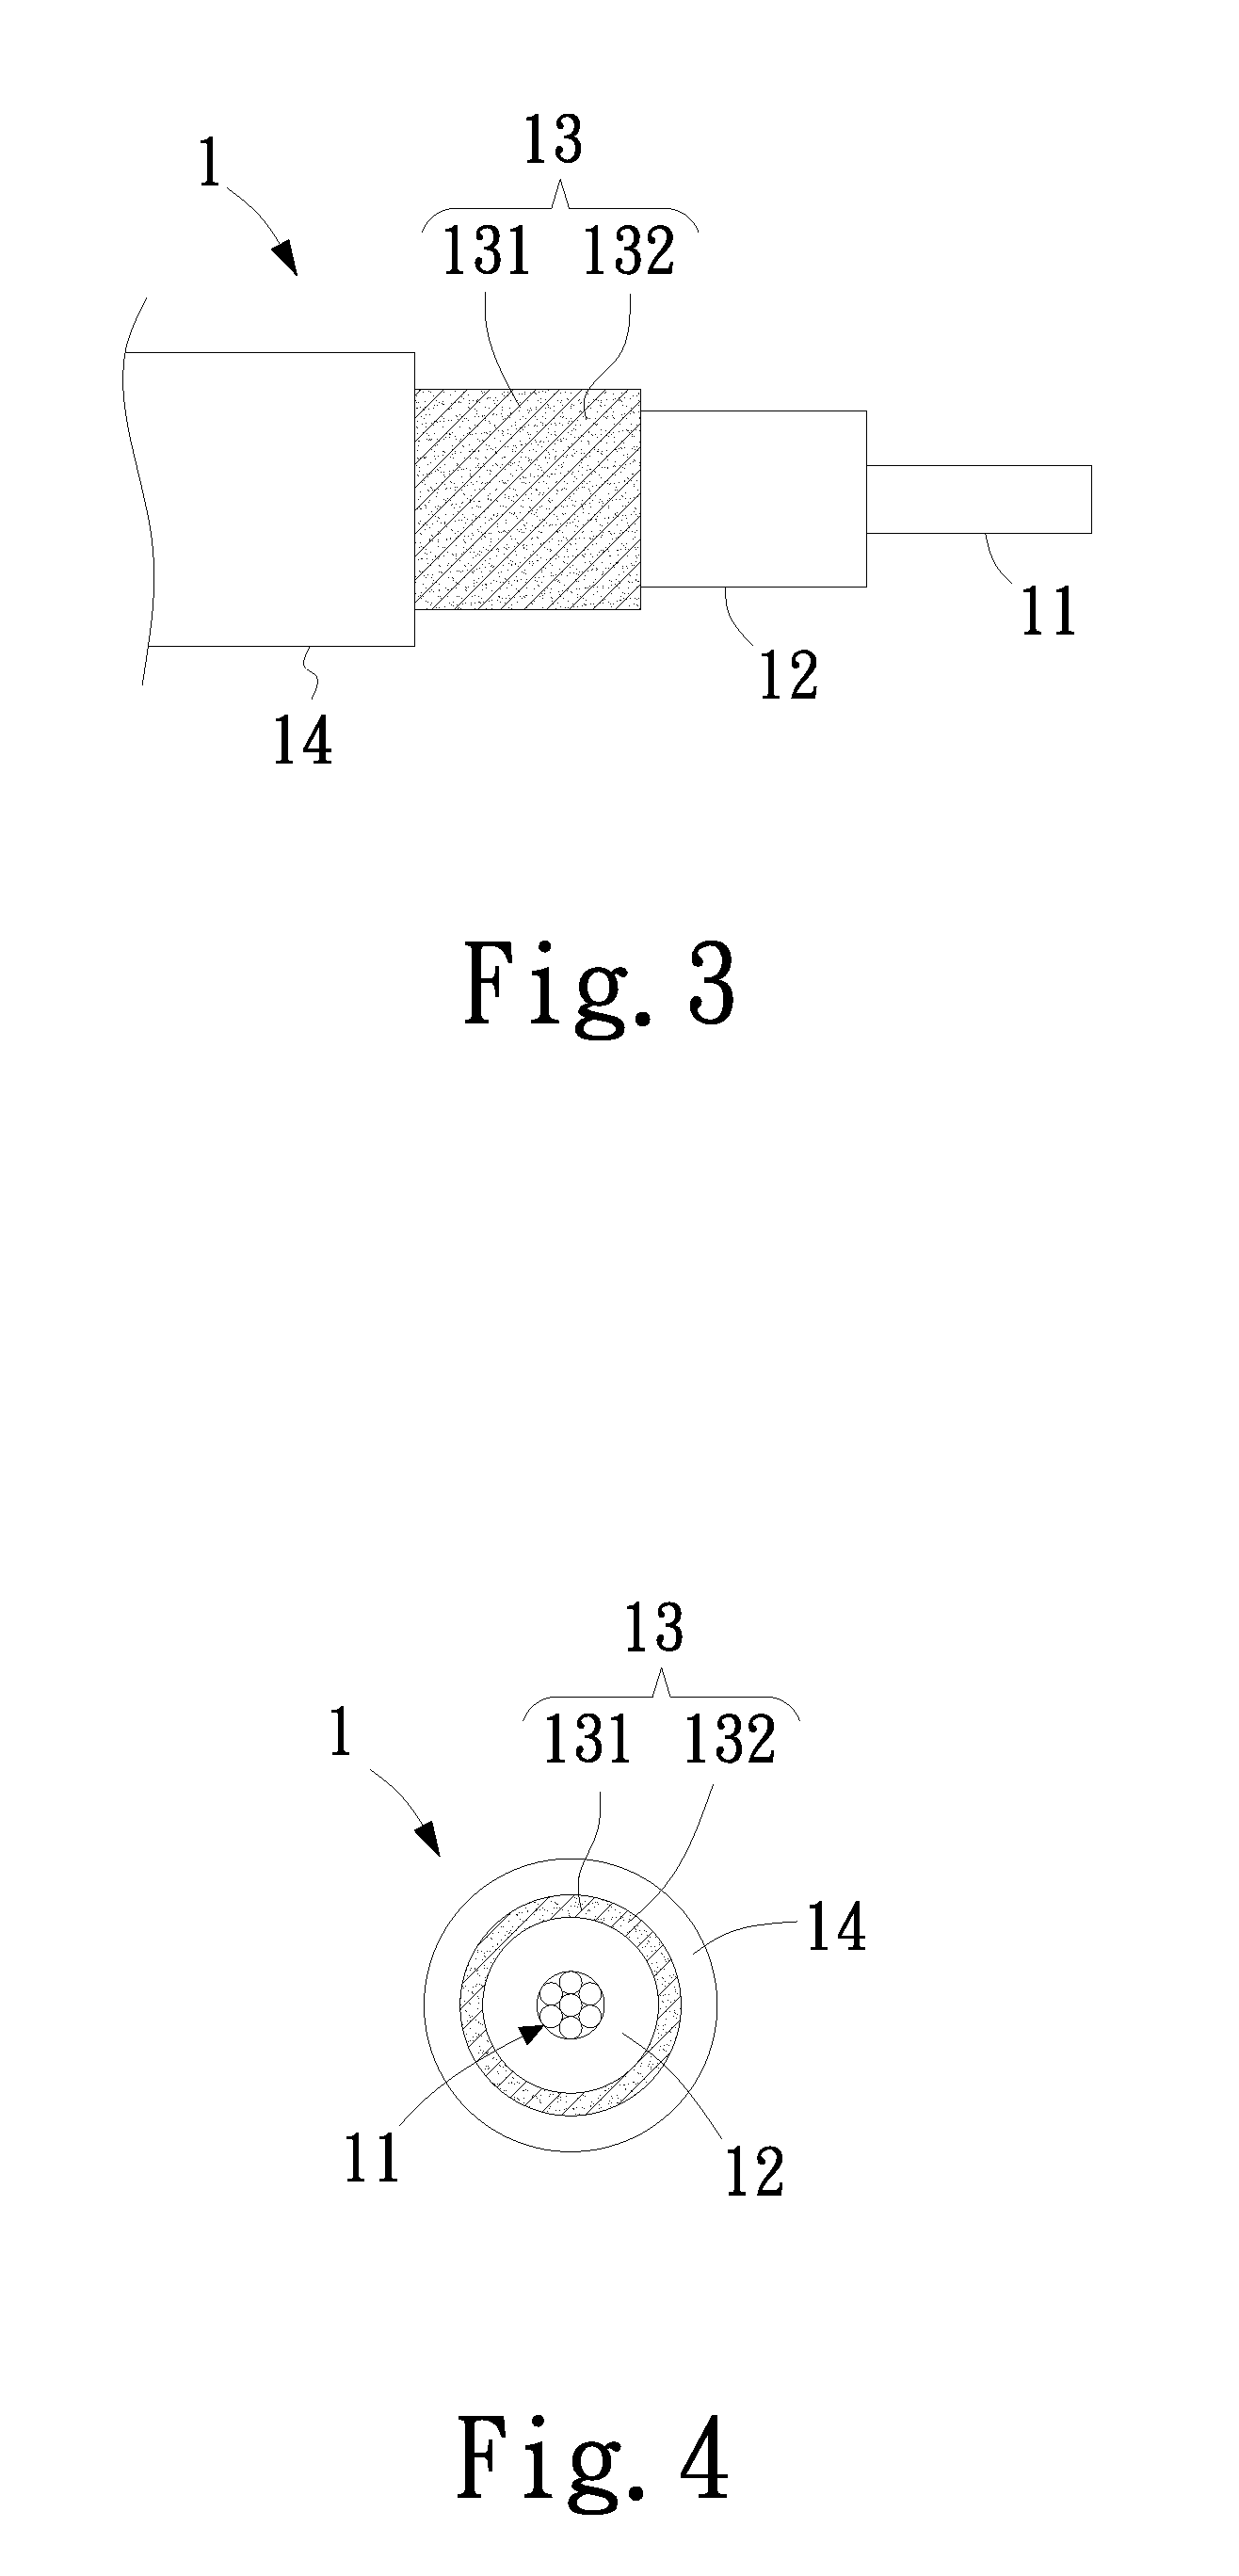 Coaxial cable structure with extruded shielding layer